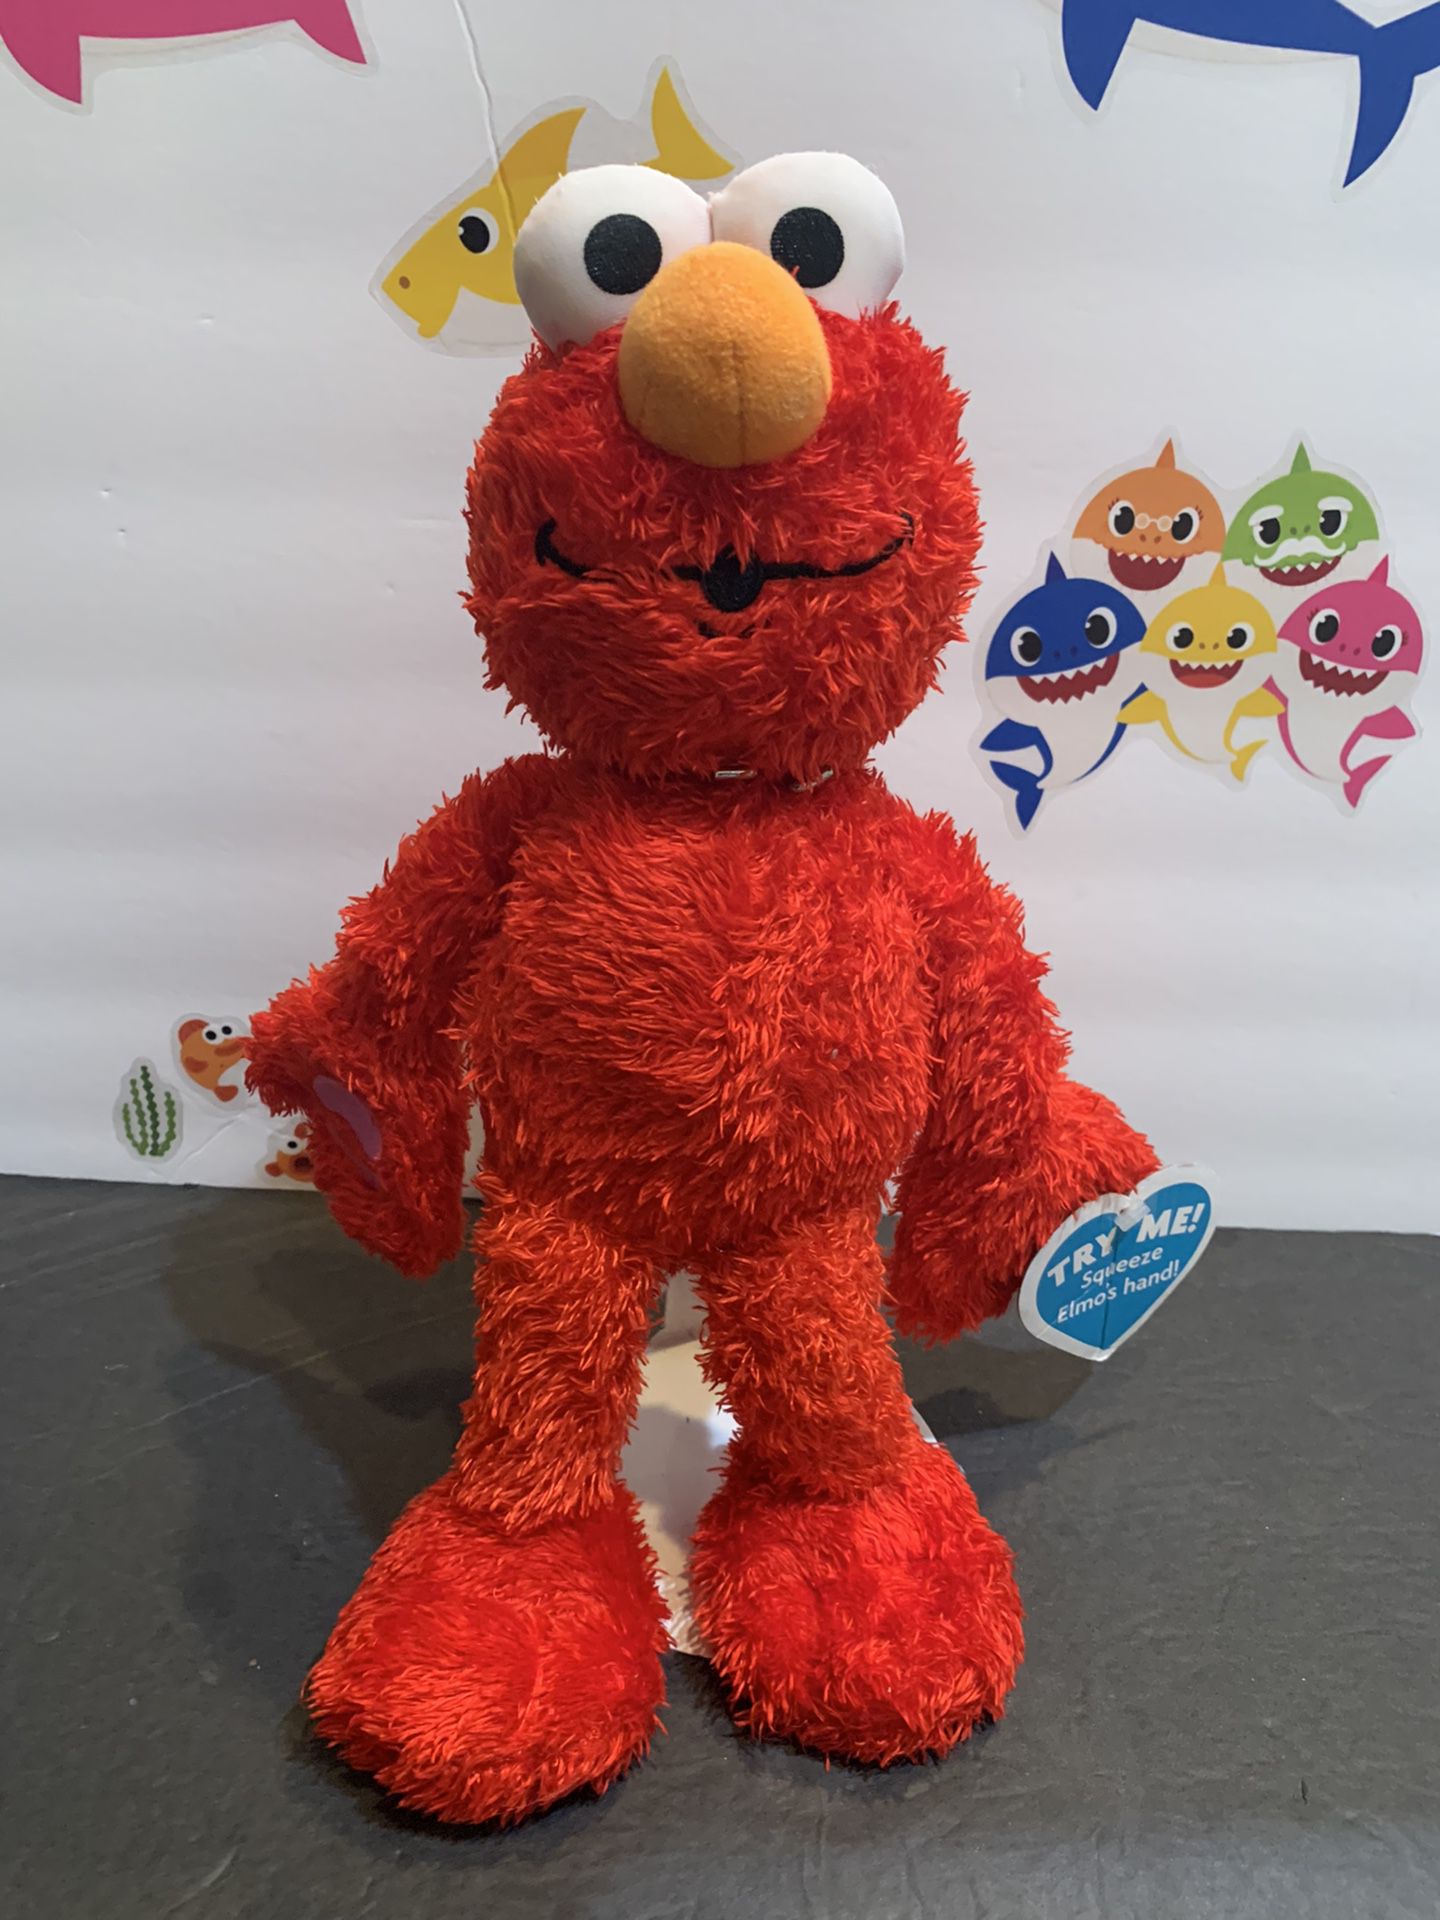 ELMO BRAND NEW DOLL! SAYS MULTIPLE I LOVE  YOU PHRASES! LIFT HIS HAND TO HIS MOUTH AND HE SAYS MUAH AND MAKES KISS SOUND! New